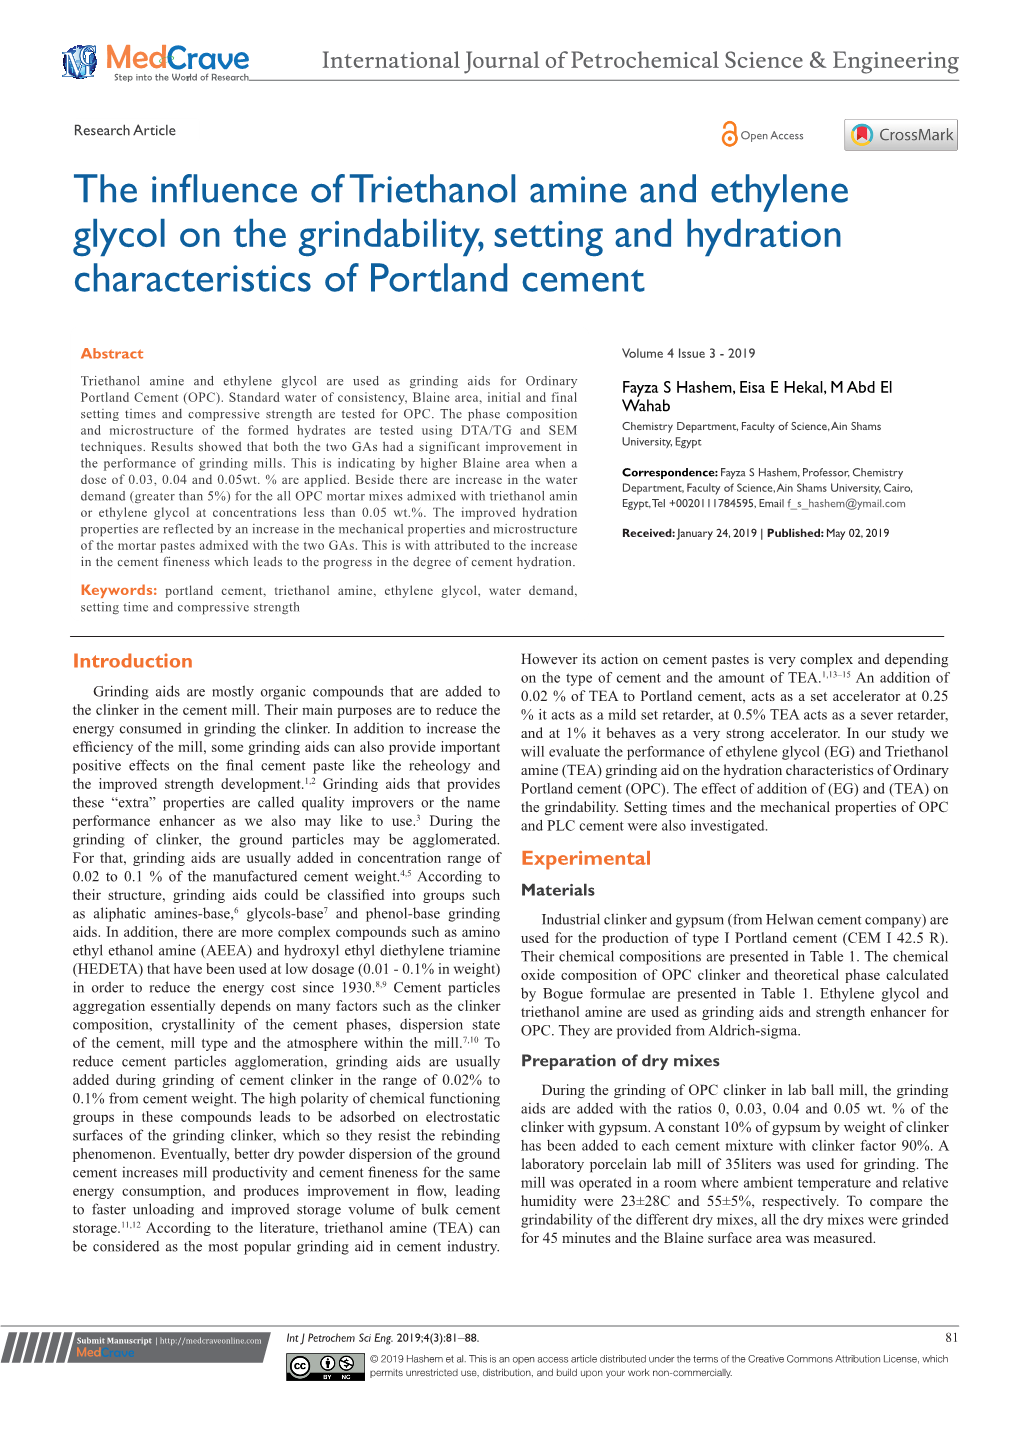 The Influence of Triethanol Amine and Ethylene Glycol on the Grindability, Setting and Hydration Characteristics of Portland Cement